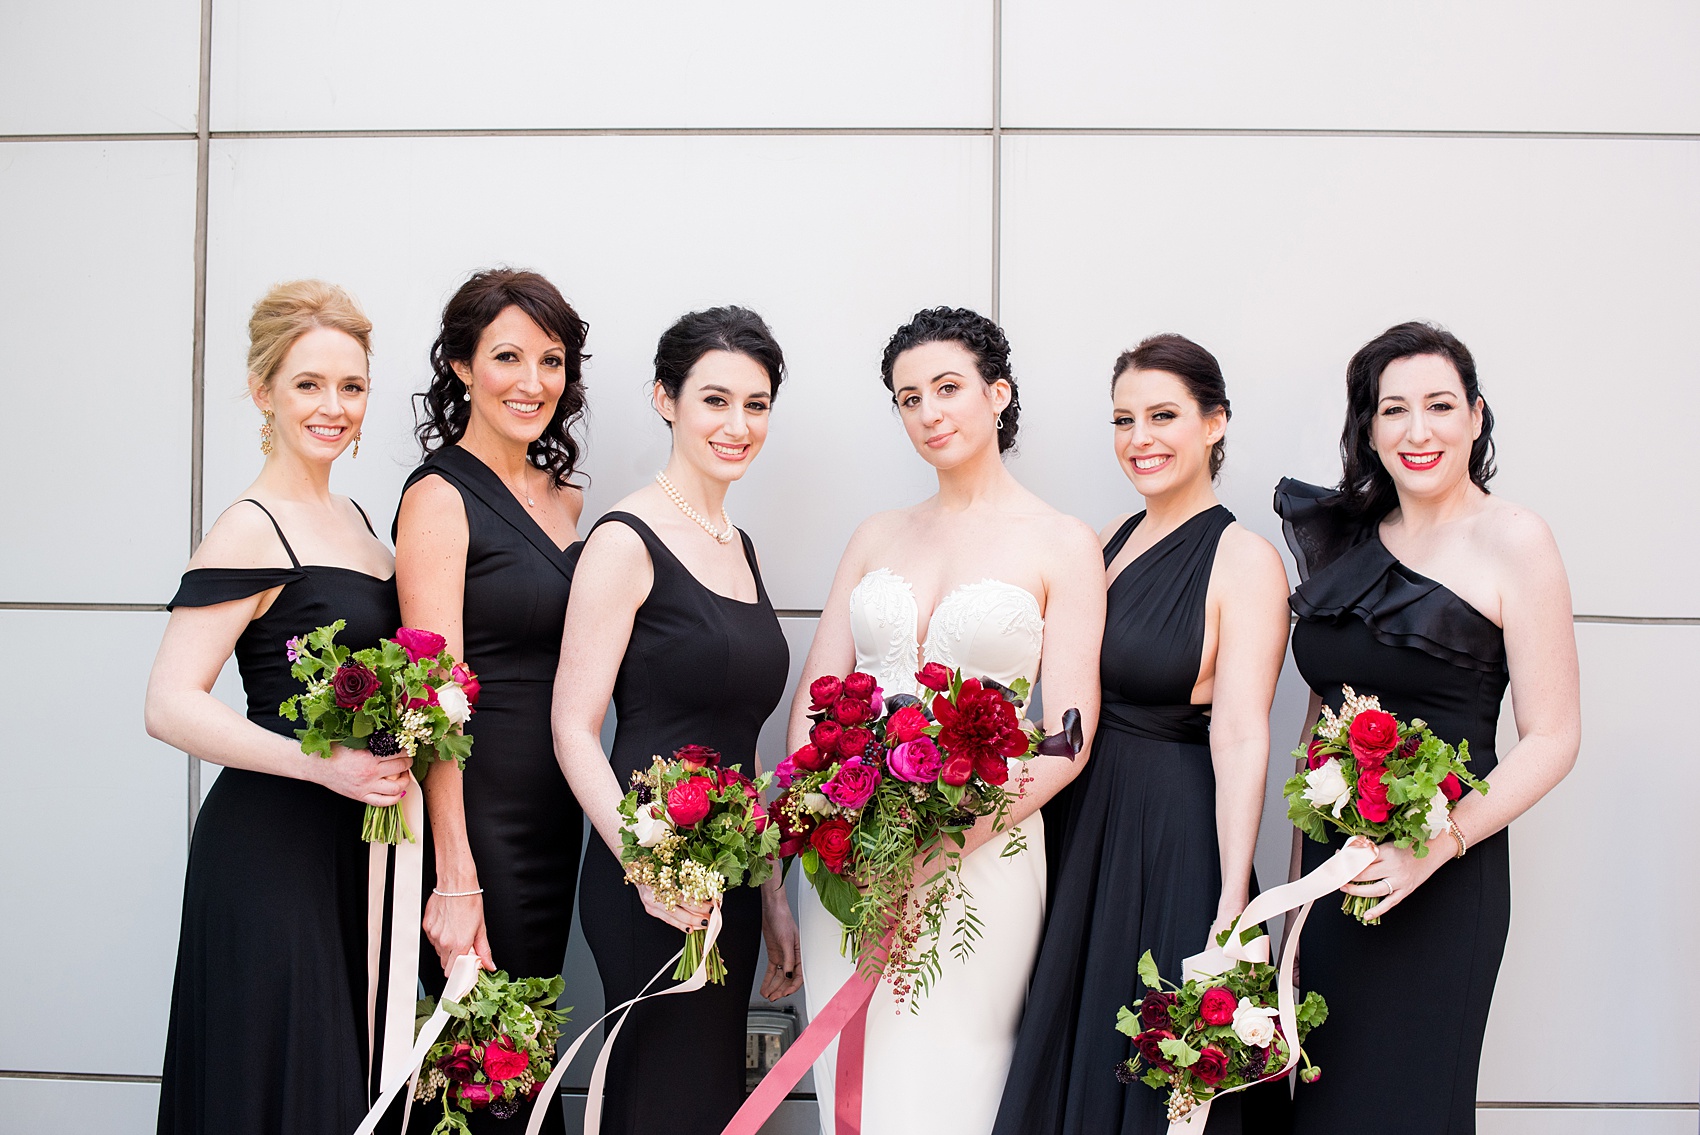 W Hoboken wedding photos at a New Jersey venue overlooking the NYC skyline. Picture by Mikkel Paige Photography of the bridal party in varied, mismatched black gowns carrying romantic bouquets in red and pink and long ribbons by Sachi Rose Designs. #mikkelpaige #HobokenWedding #NewJerseyPhotographer #NewYorkCityPhotographer #NYCweddingphotographer #brideandgroomphotos #redpeonies #romanticwedding #springwedding #CityWedding